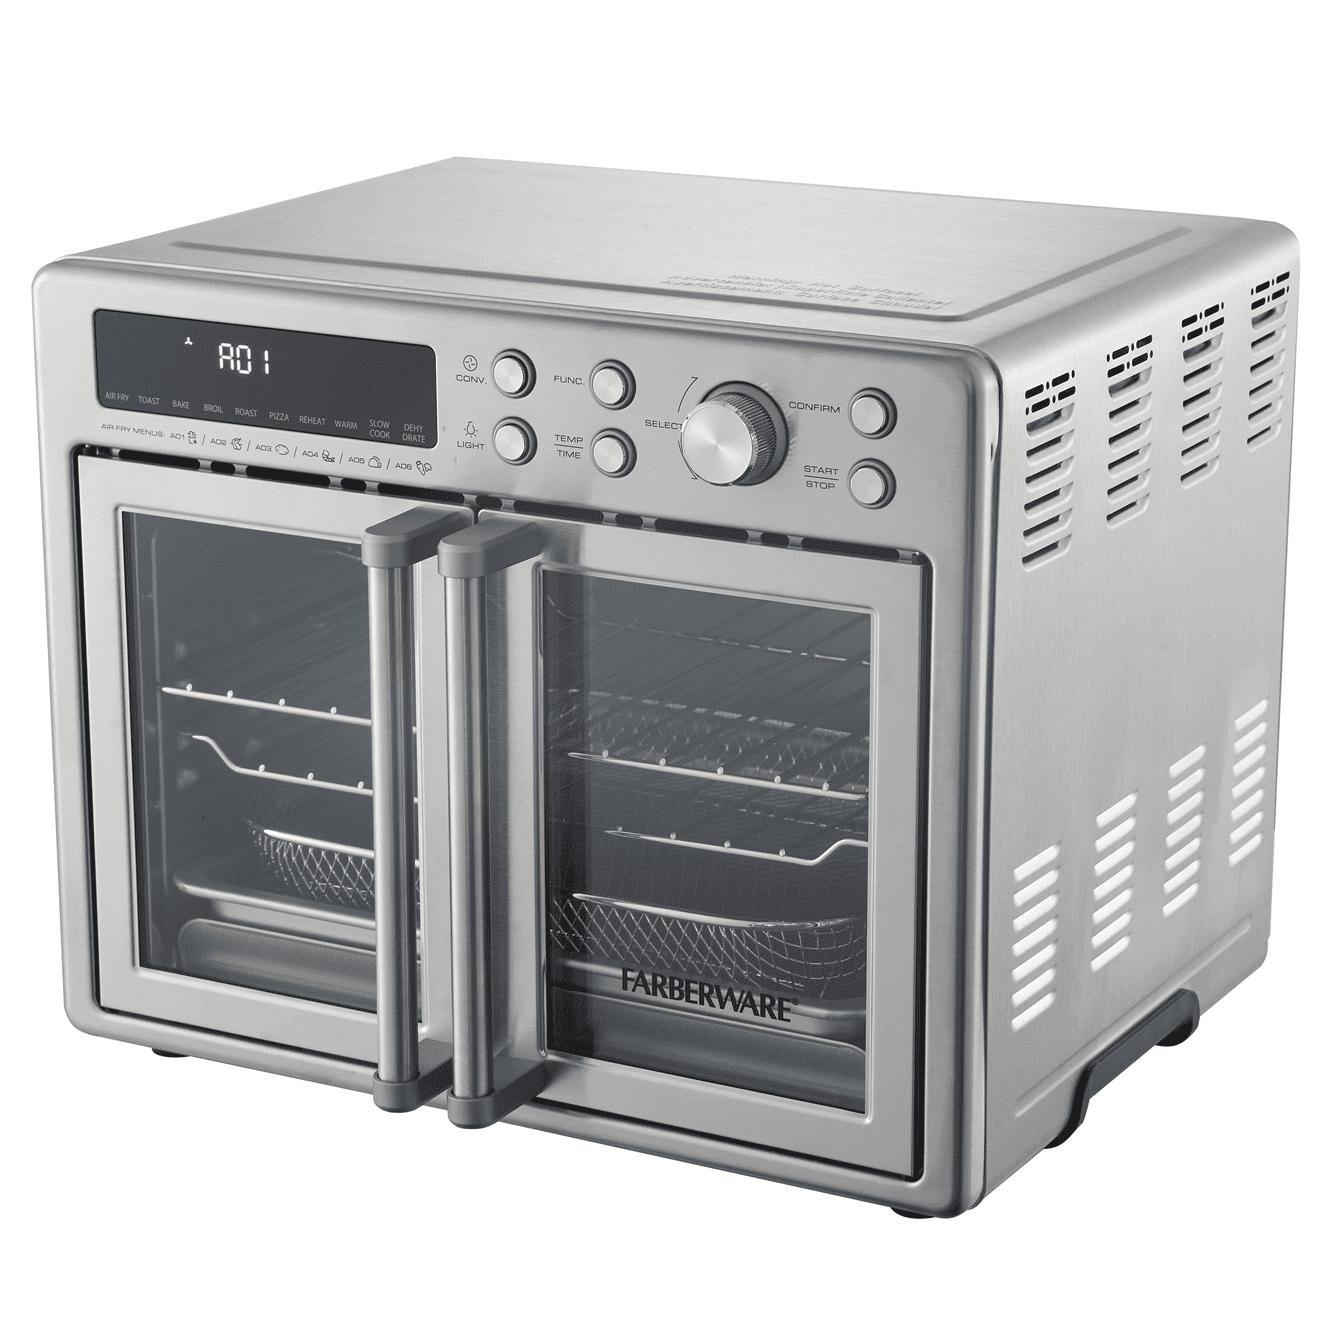 https://ak1.ostkcdn.com/images/products/is/images/direct/b377e4ce7daccb36d65426f0f6e7214571450717/Brand-25L-6-Slice-Toaster-Oven-with-Air-Fry%2C-French-Door%2C-FW12-100024316.jpg